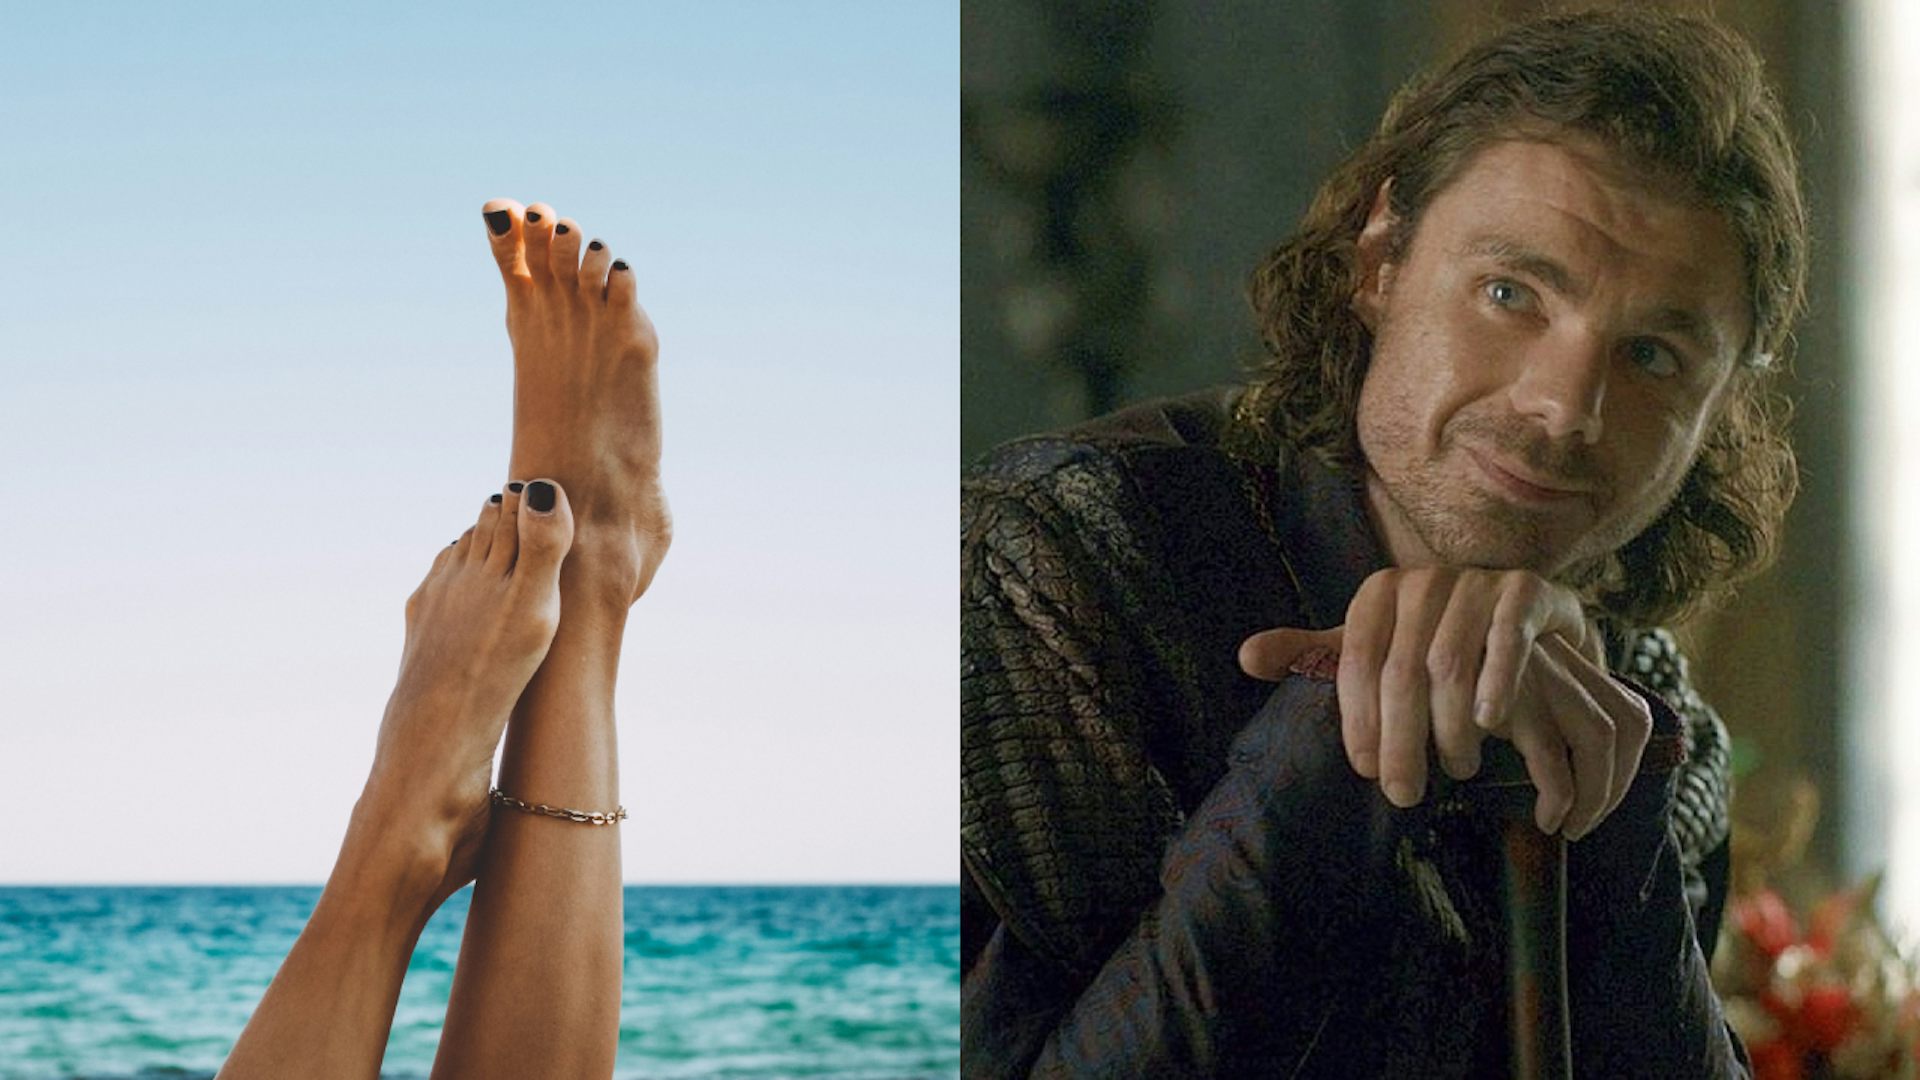 The foot scene in House of the Dragon was upsetting, but its nothing compared to the real history of the fetish